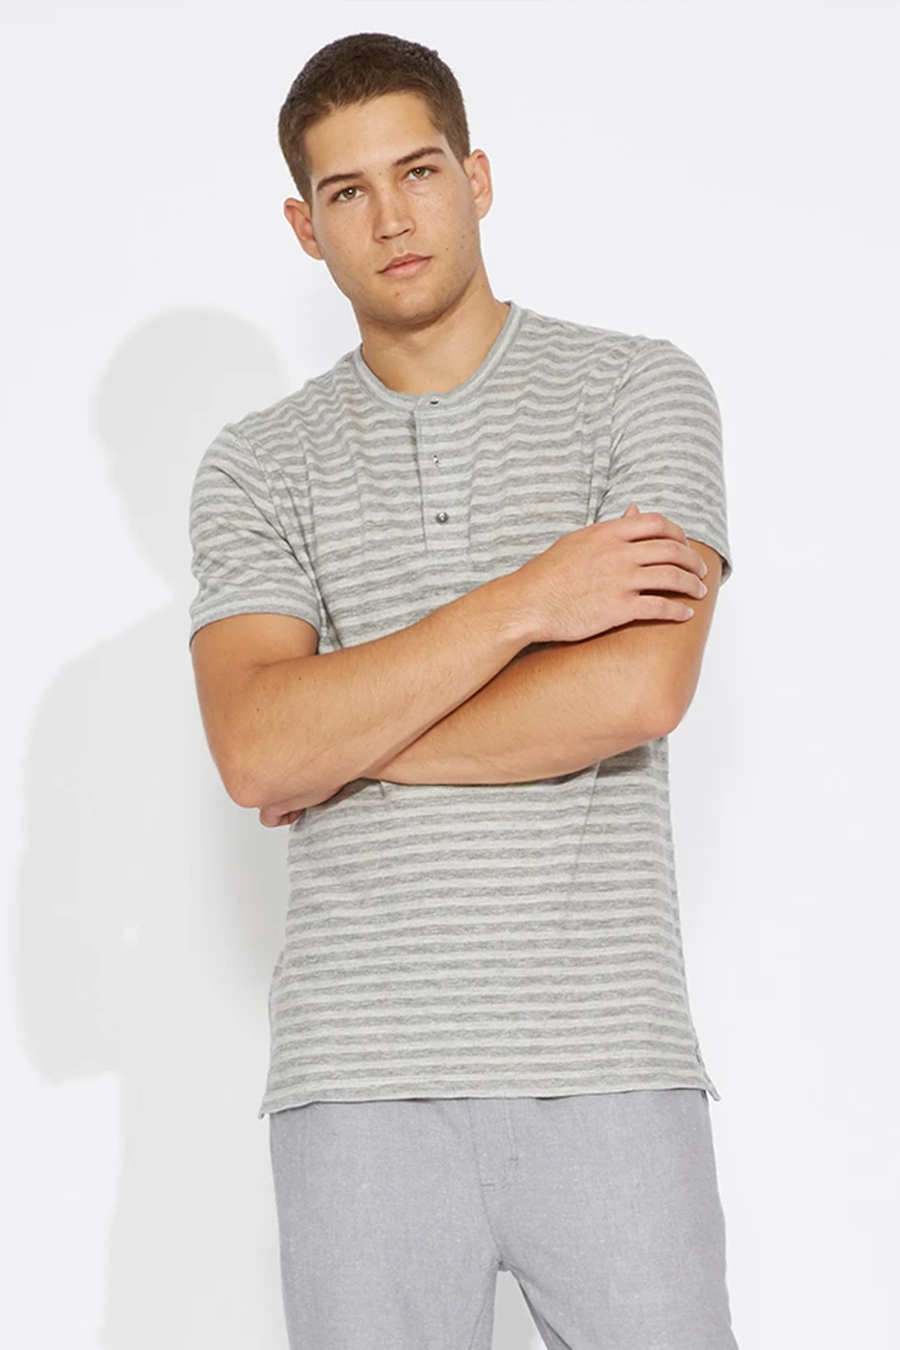 Haskett Step Up Henley | Heather Gray - Main Image Number 1 of 1